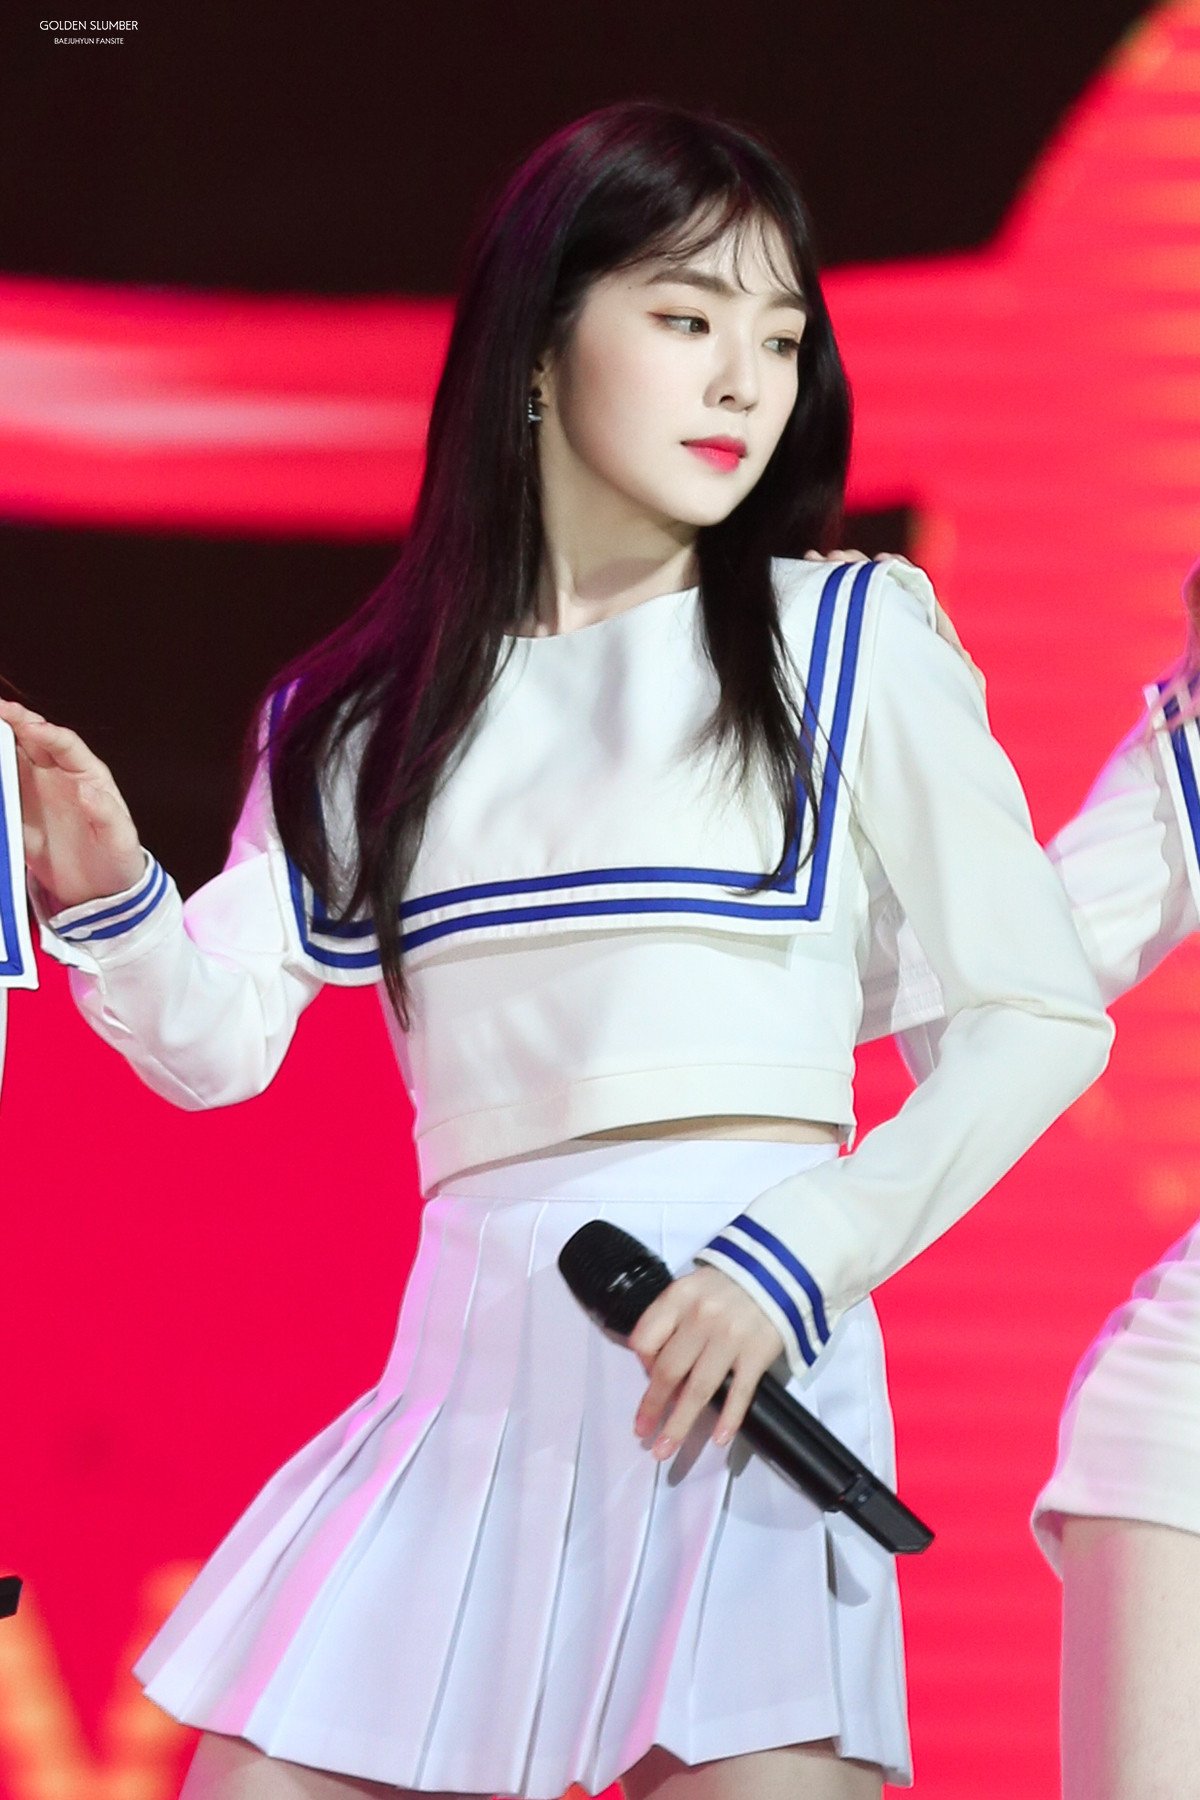 Irene Cut Her Bangs Short For The First Time And It's 